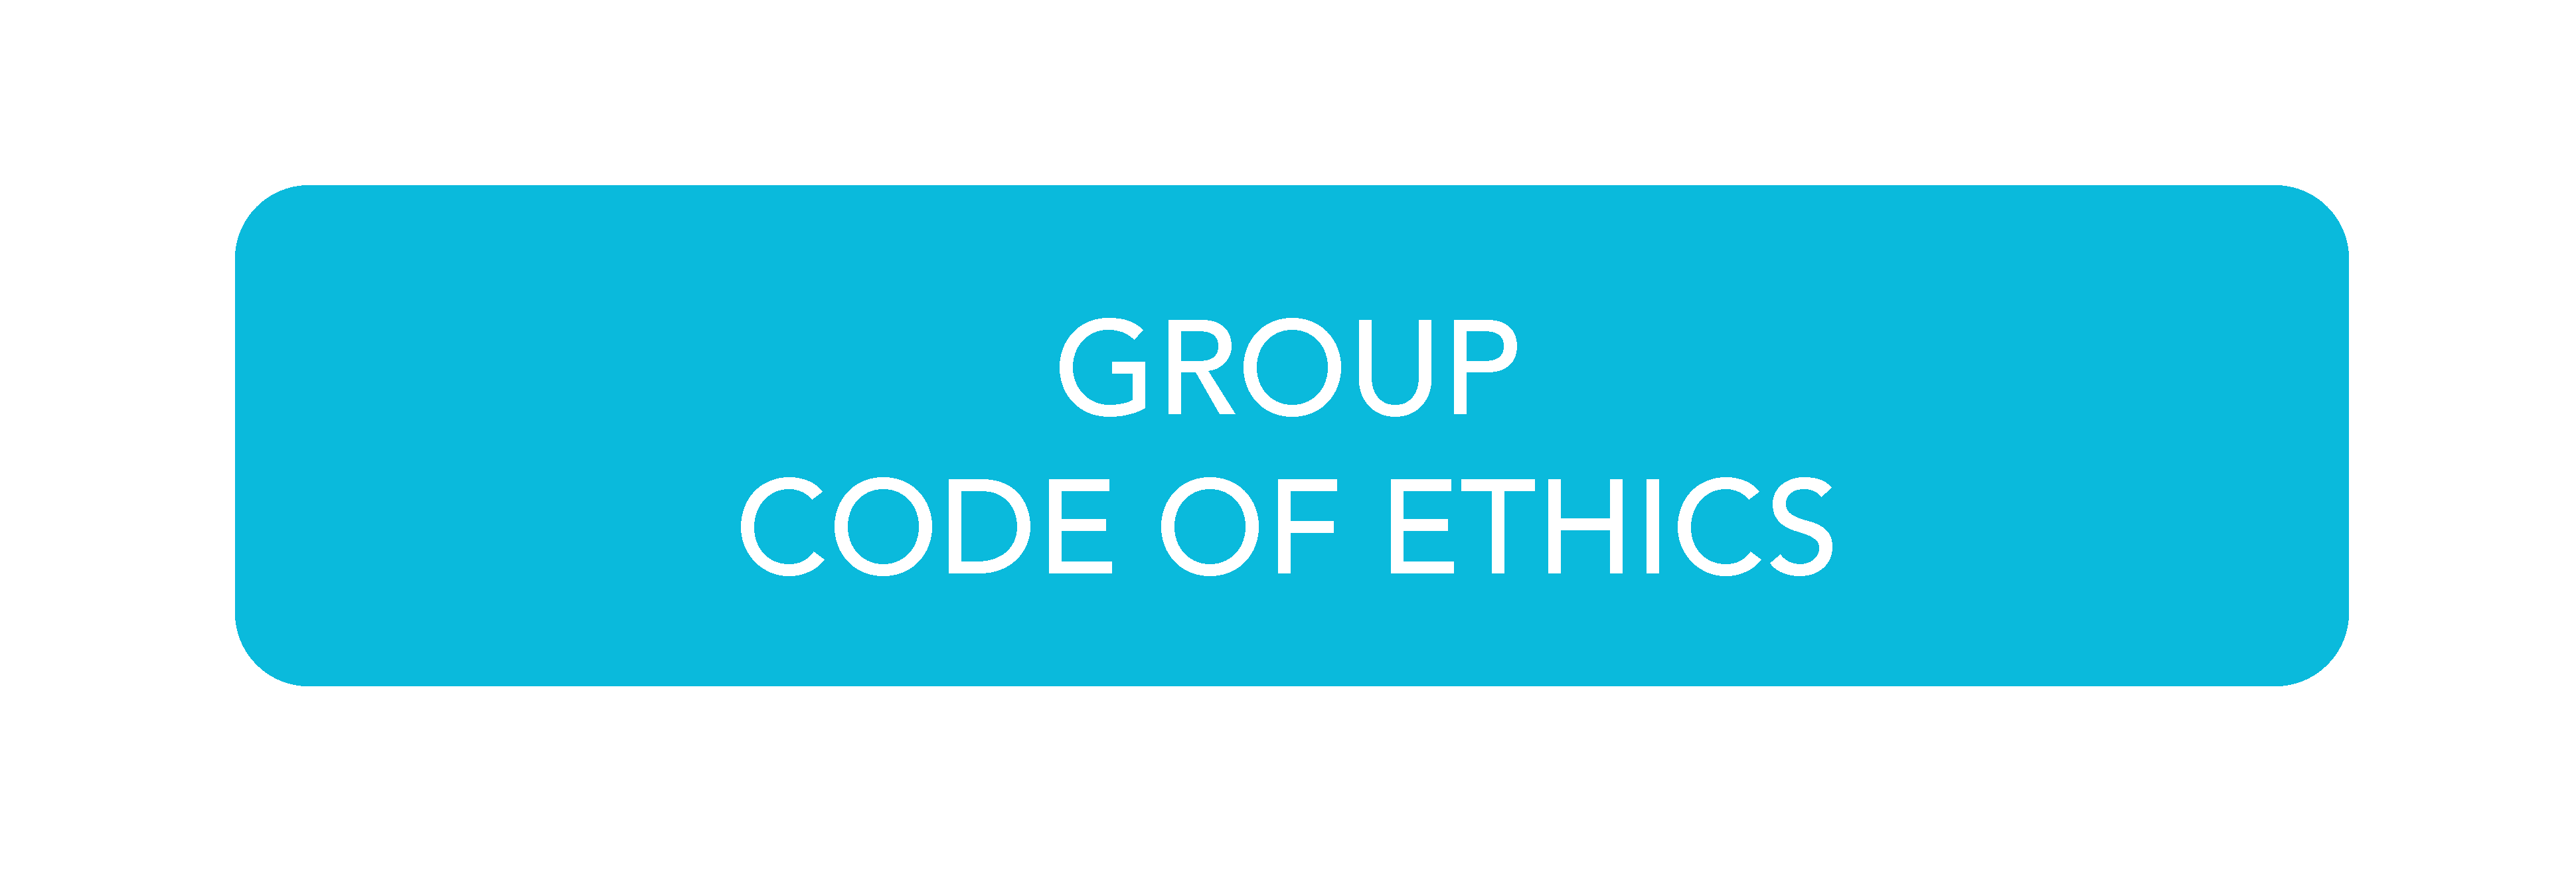 GROUP CODE OF ETHICS.png